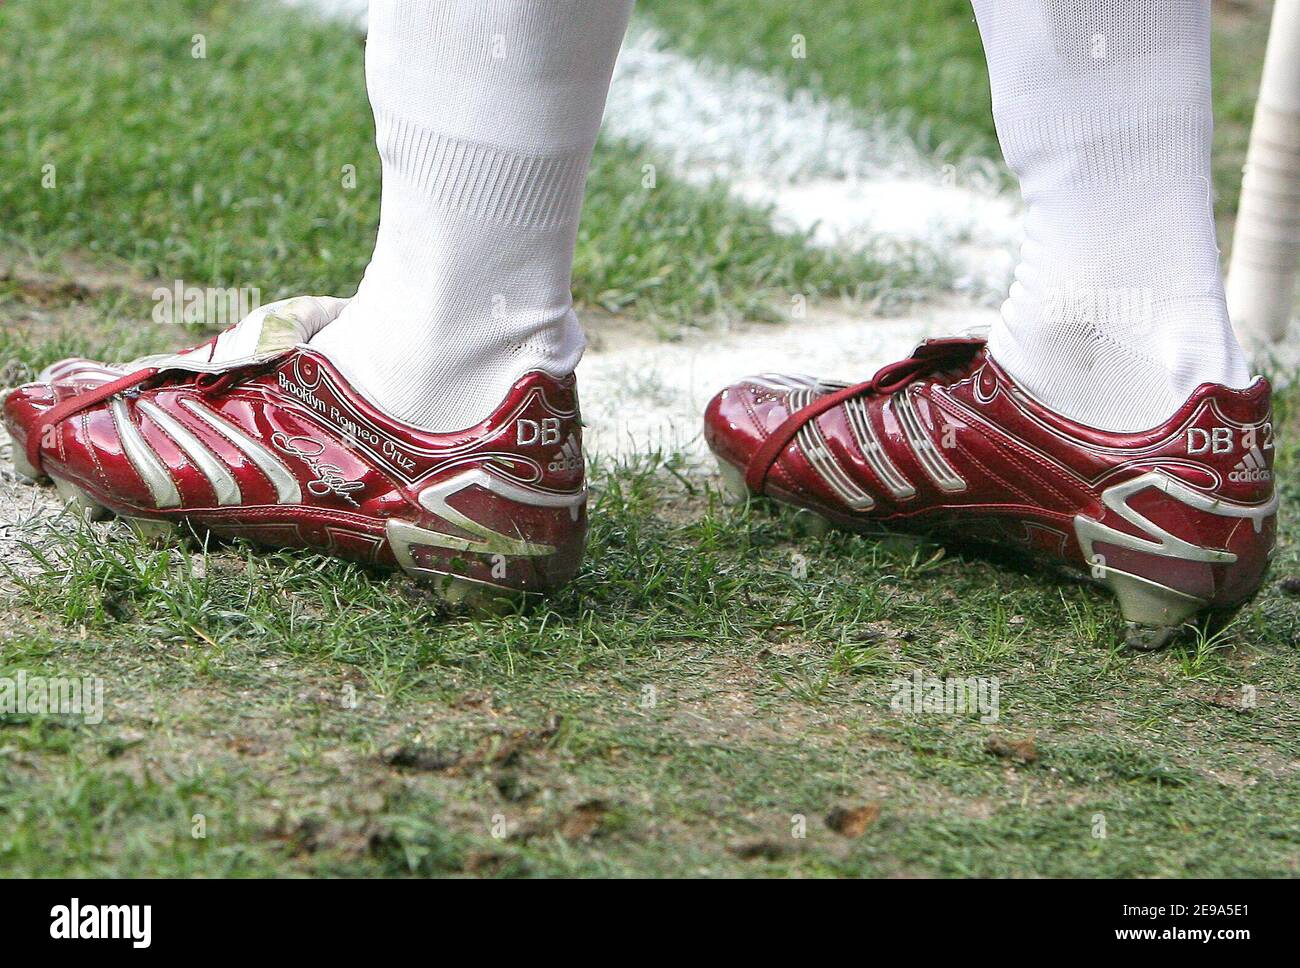 Real Madrid's David Beckham shoes with the name of the three children  during the Spanish primera league, FC Barcelona vs Real Madrid, at the Nou  Camp Stadium, in Barcelona, Spain, on April